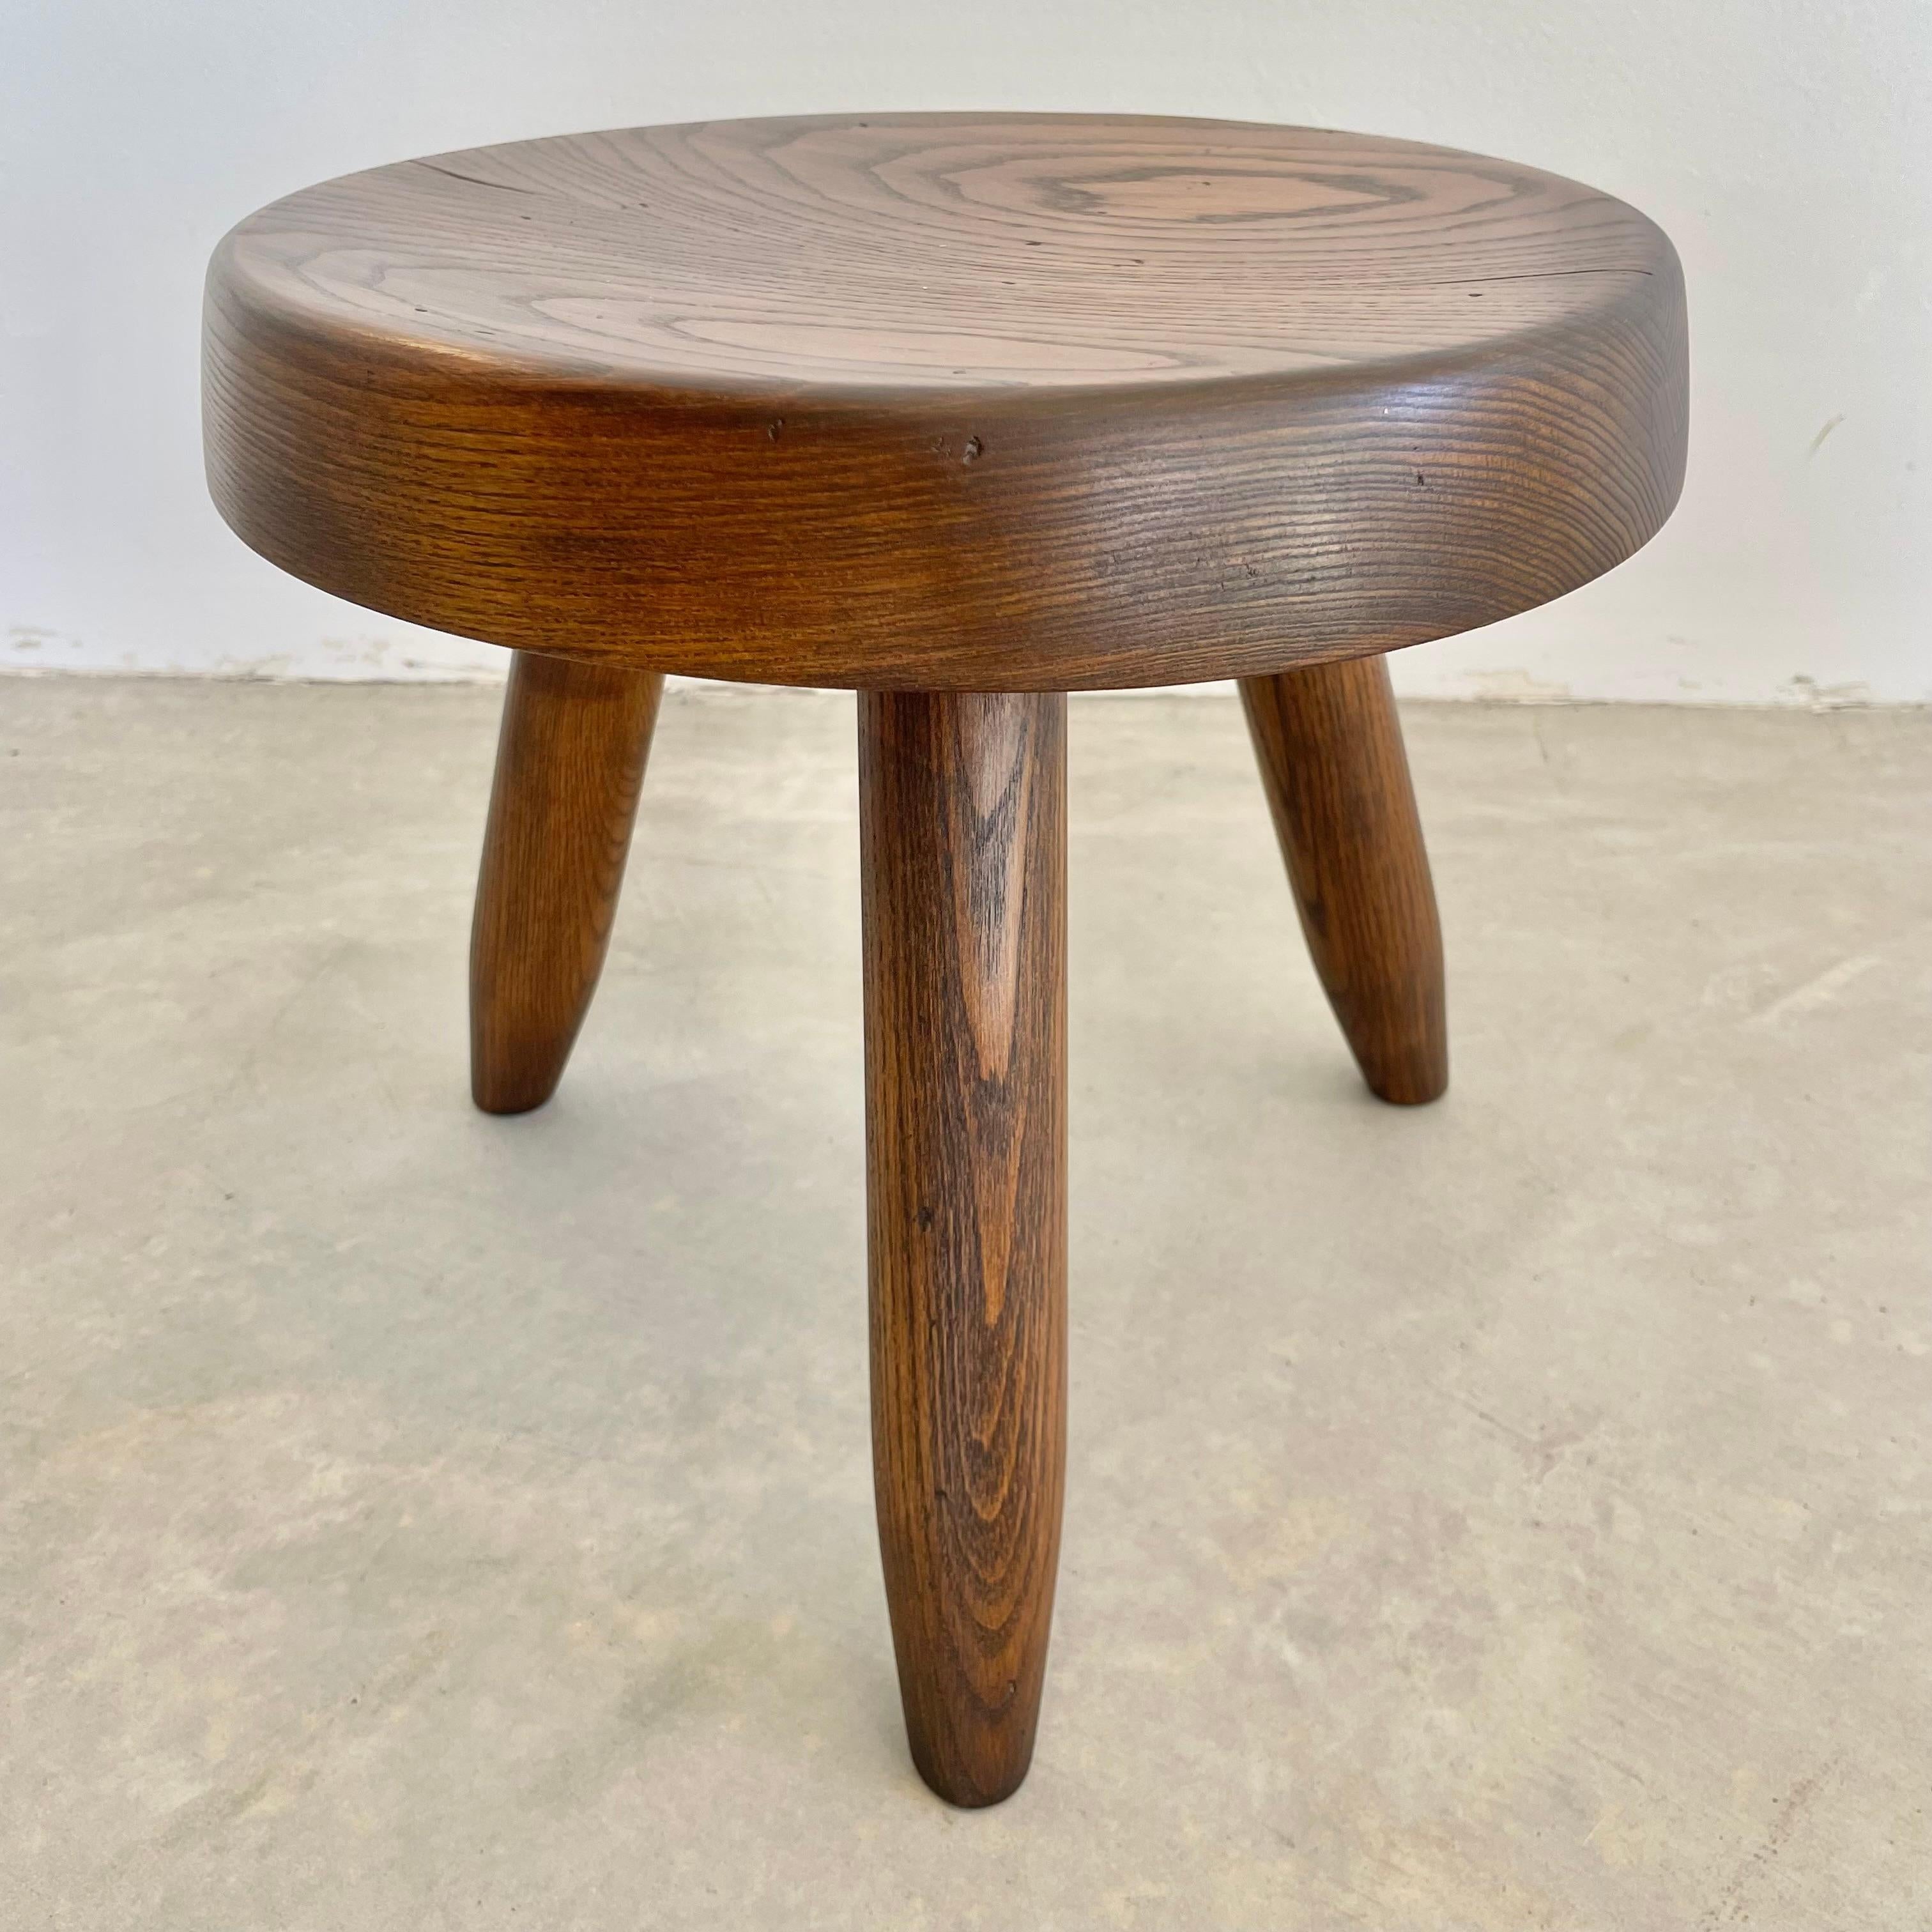 Wood Charlotte Perriand Berger Stool, 1950s France For Sale